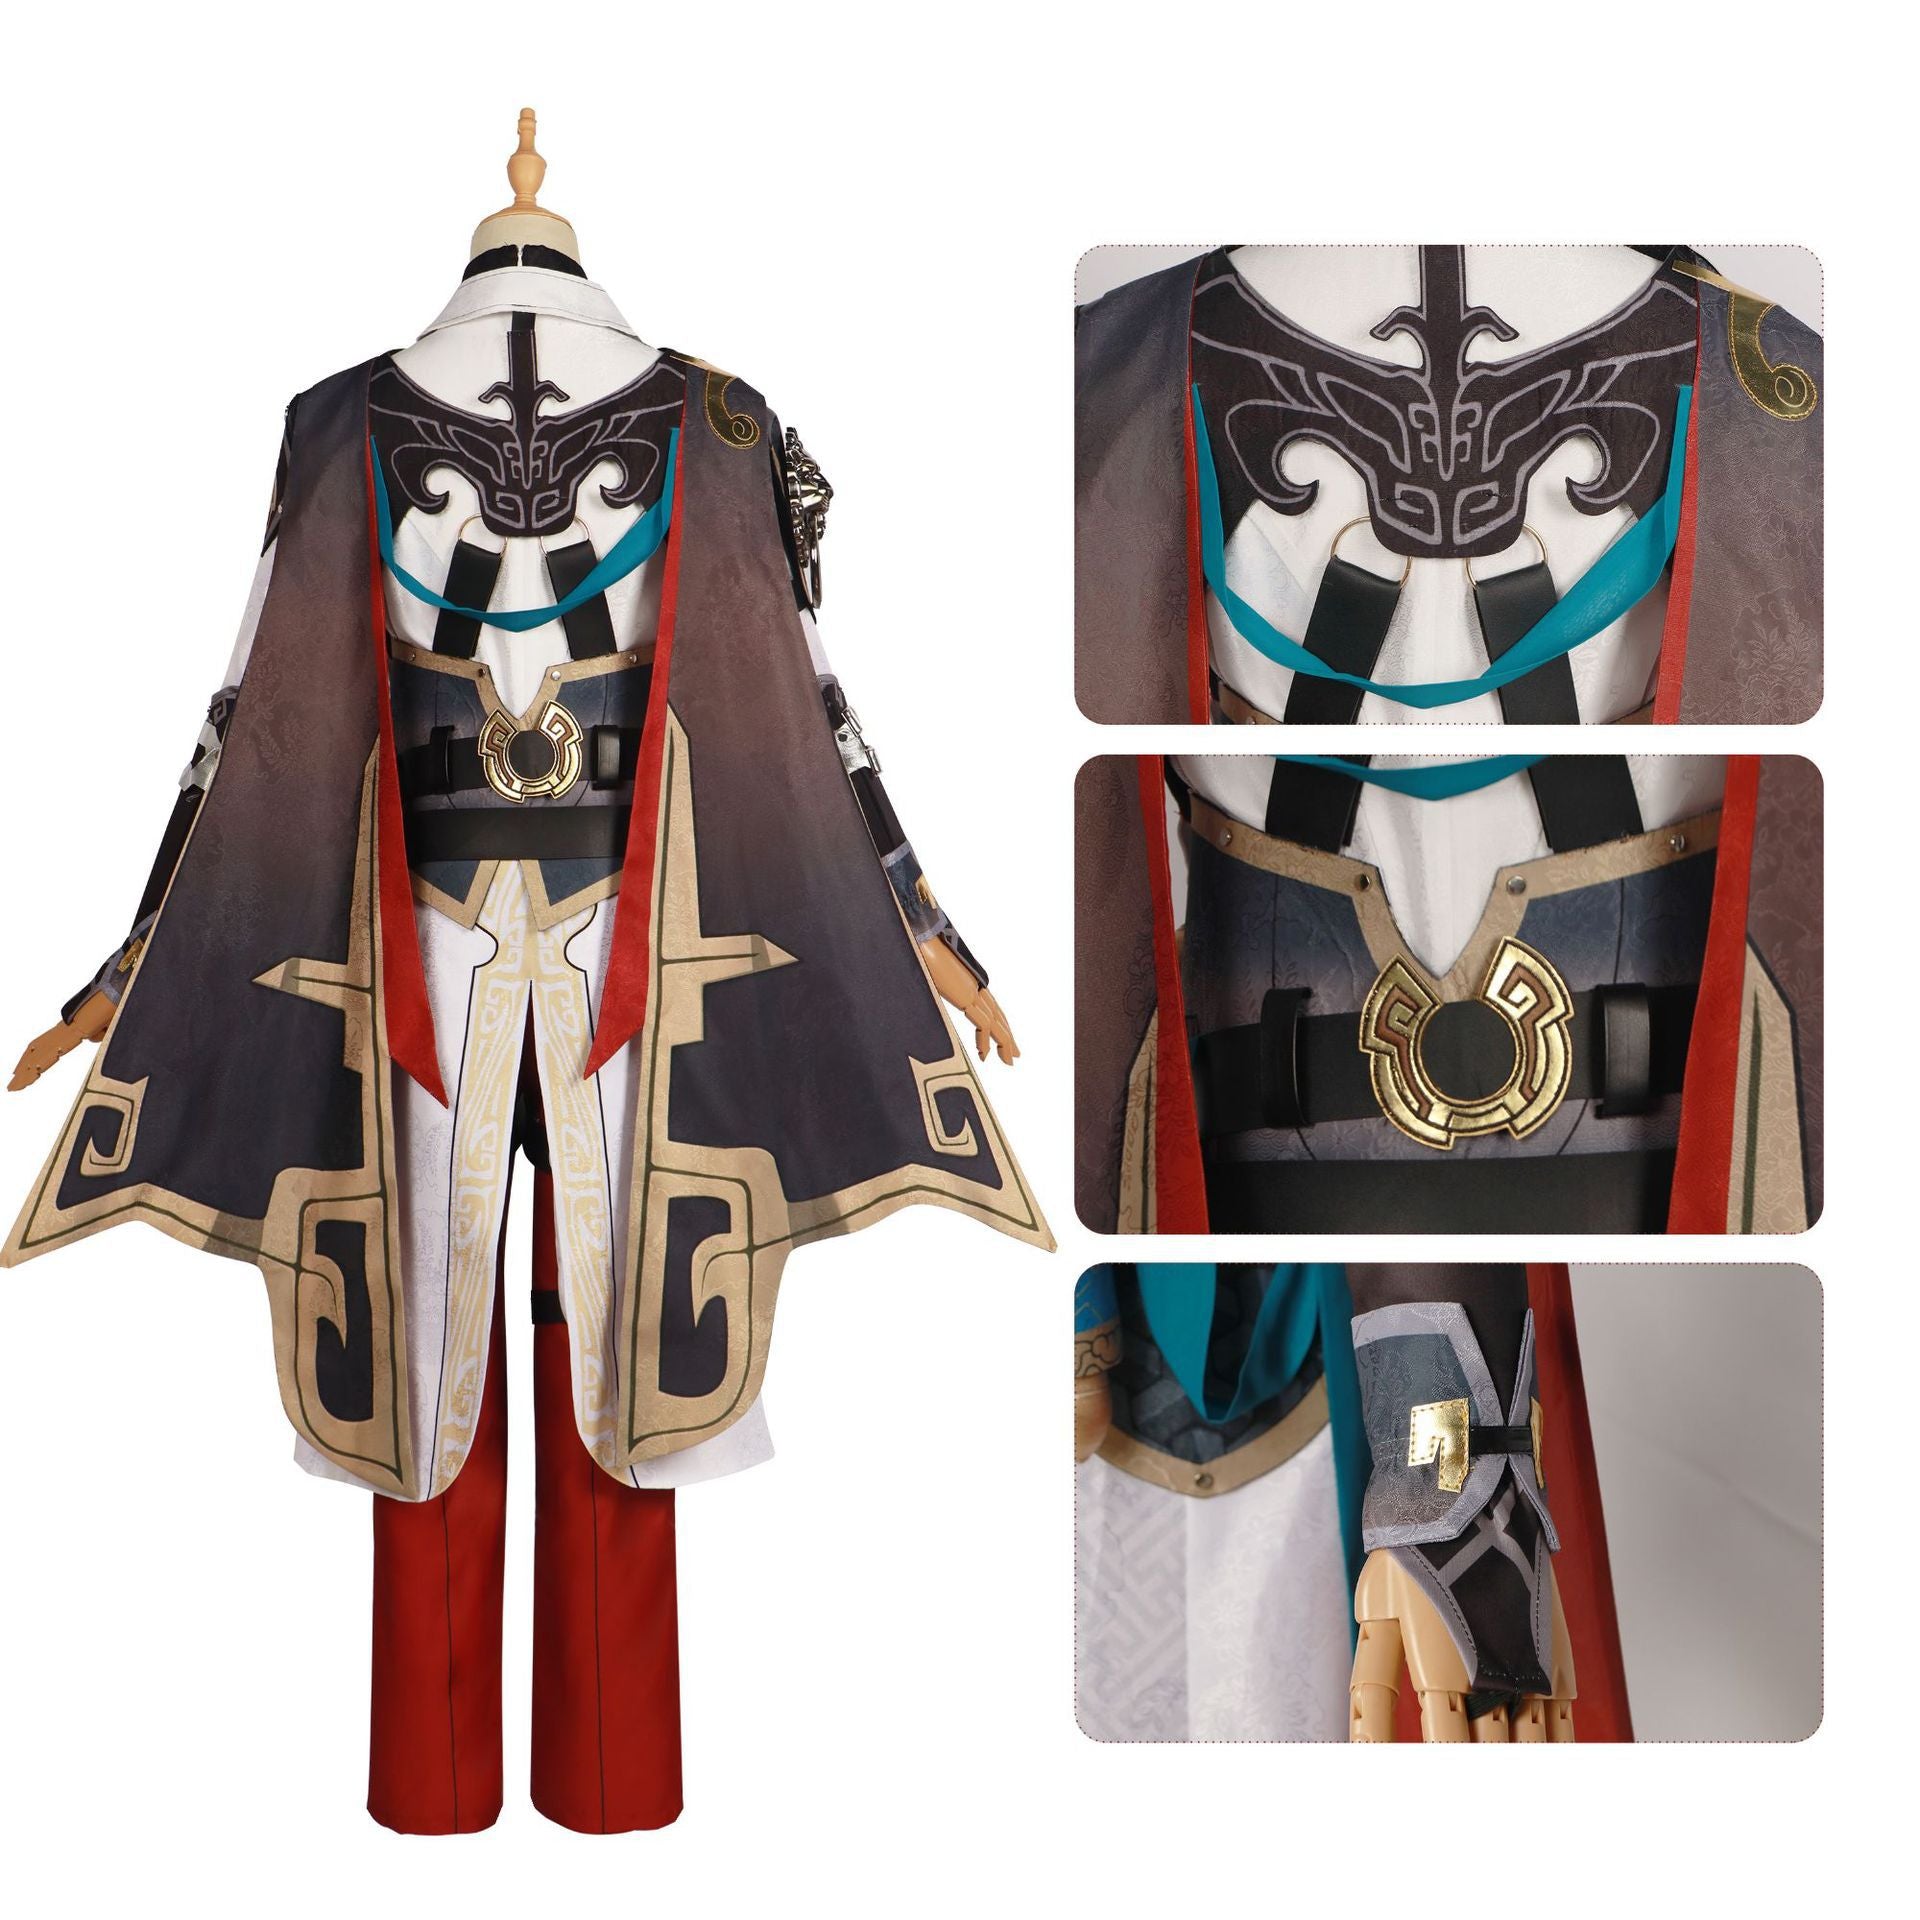 Rulercosplay Honkai Star Rail Jing Yuan Uniform Suit Cosplay Costume With Accessories For Halloween Party